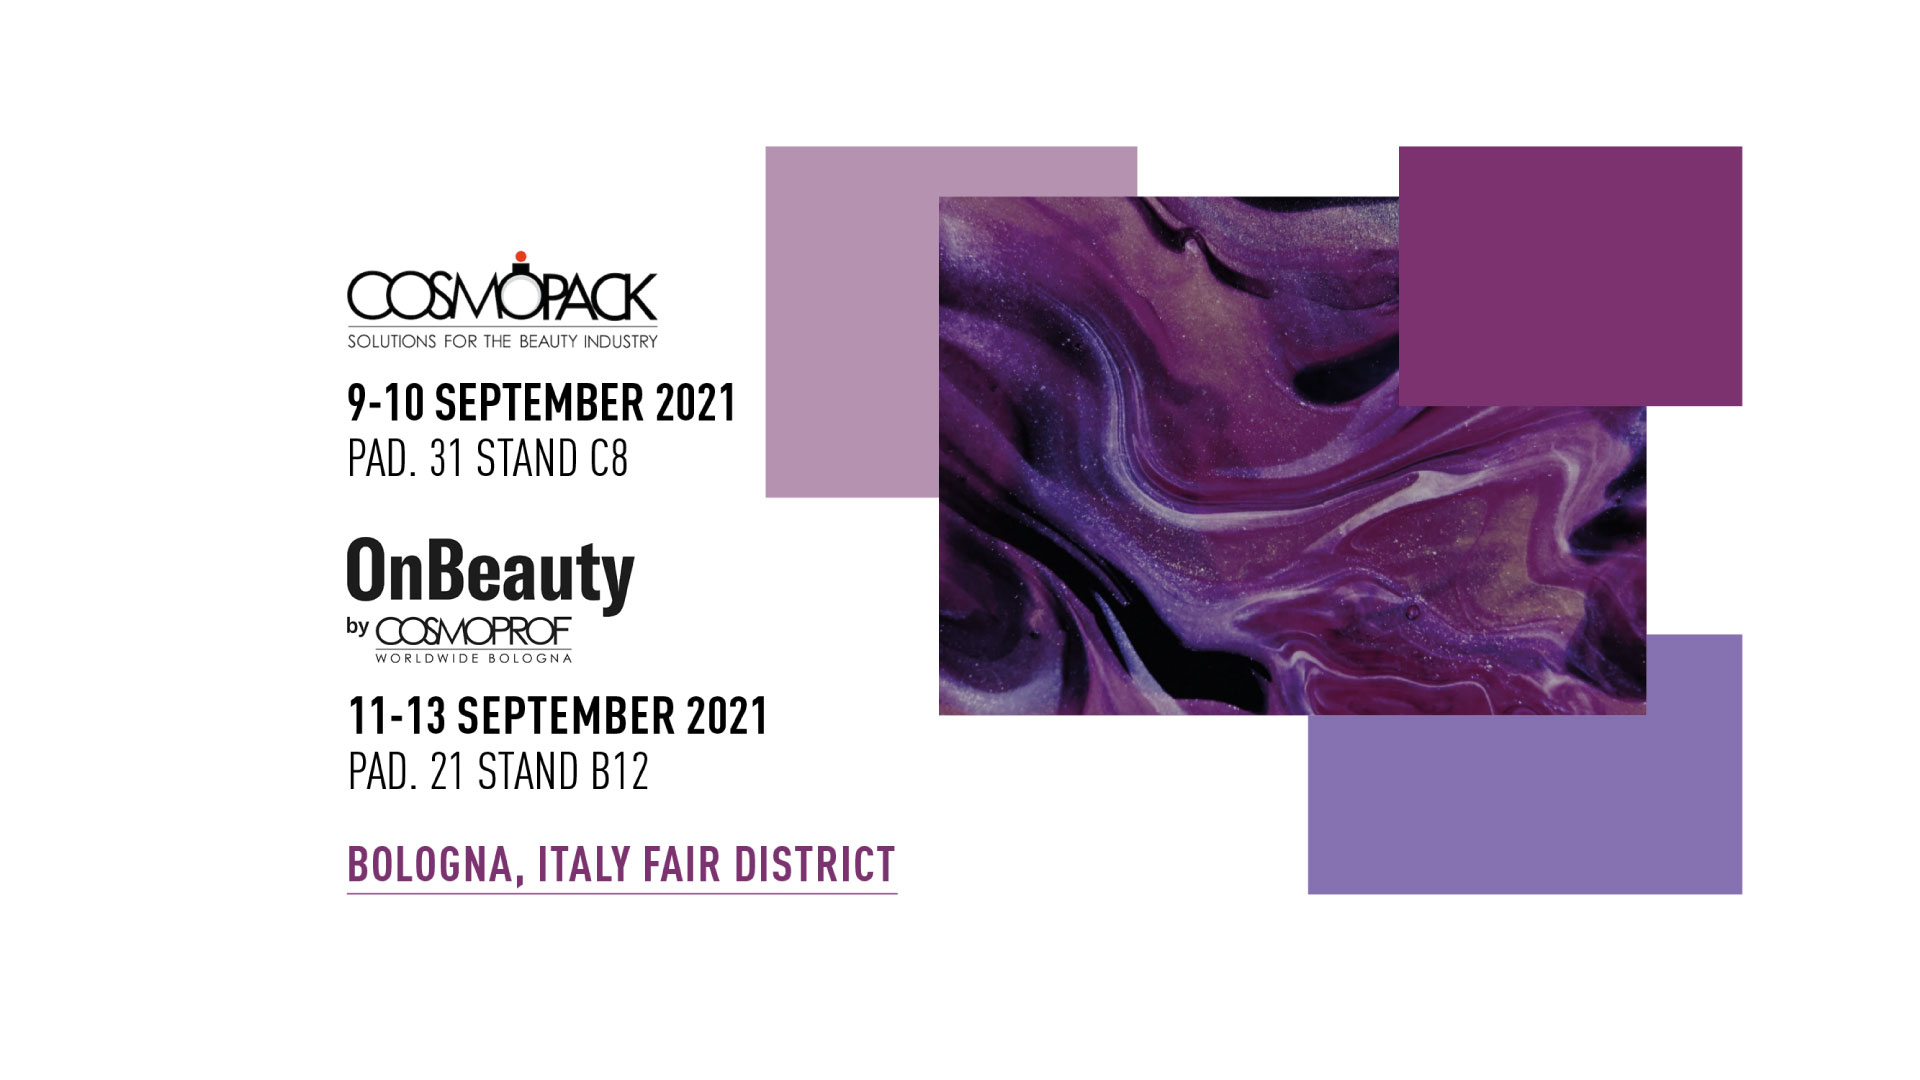 PDT Laboratori Cosmetici will participate to the #OnBeauty event by Cosmoprof